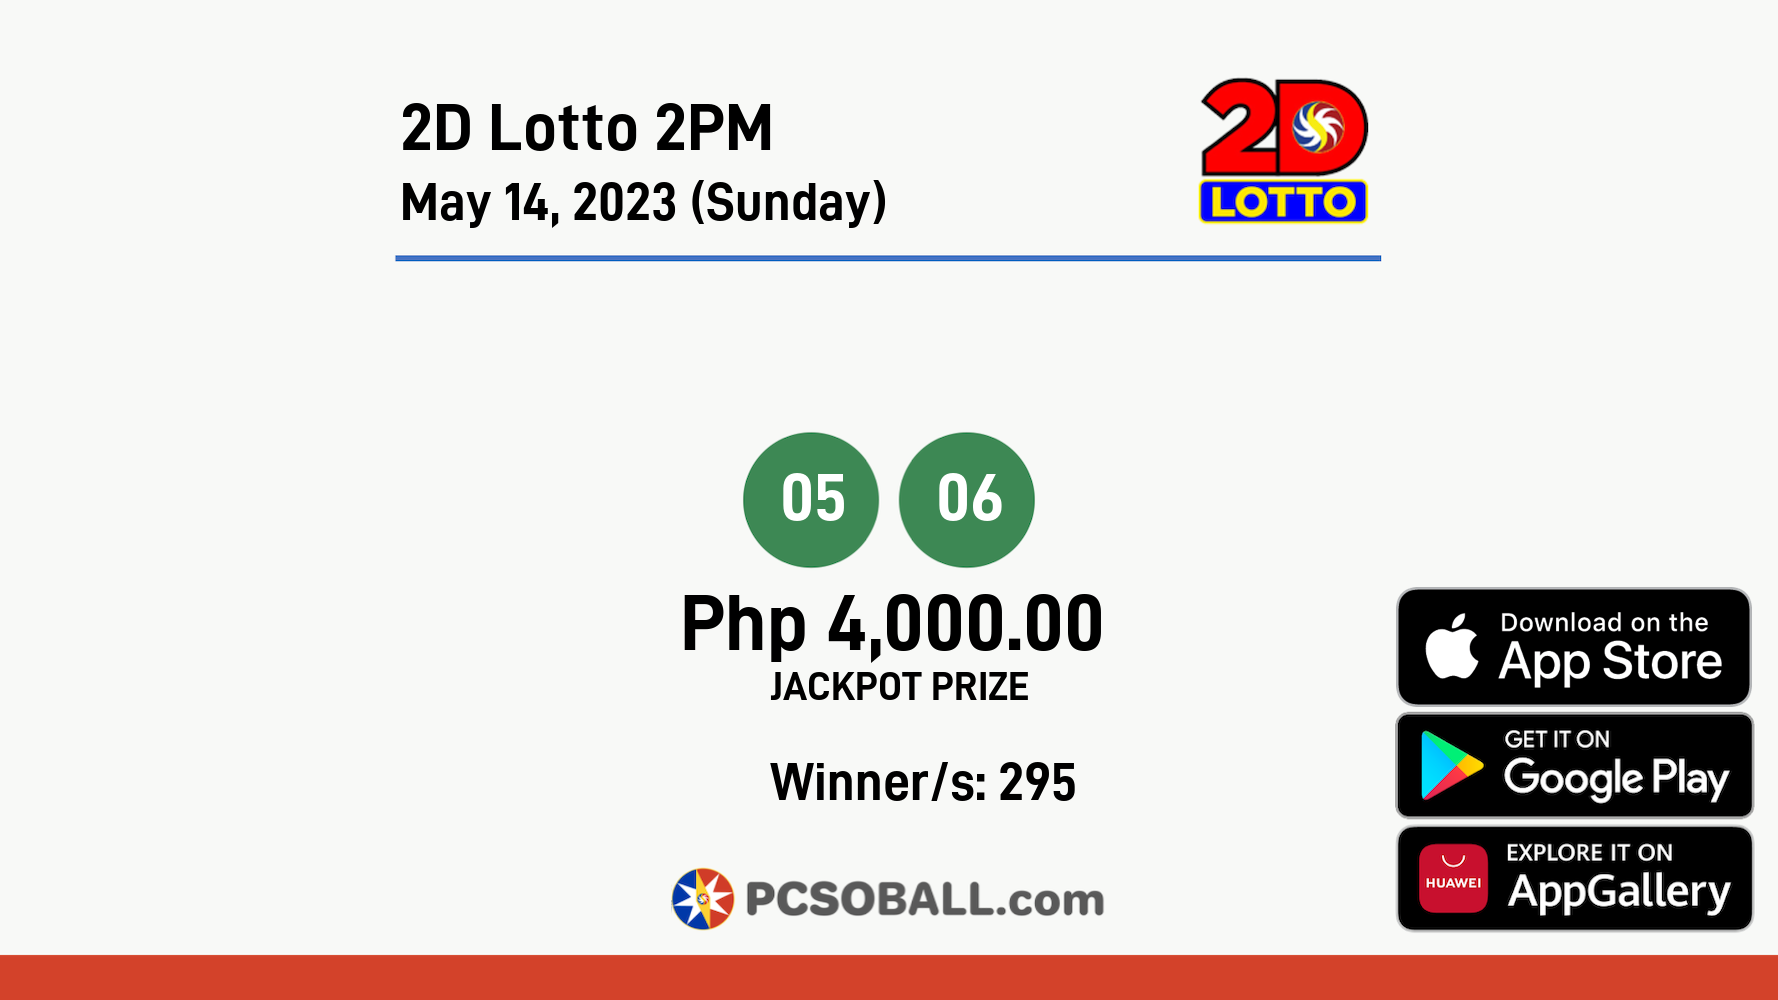 2D Lotto 2PM May 14, 2023 (Sunday) Result